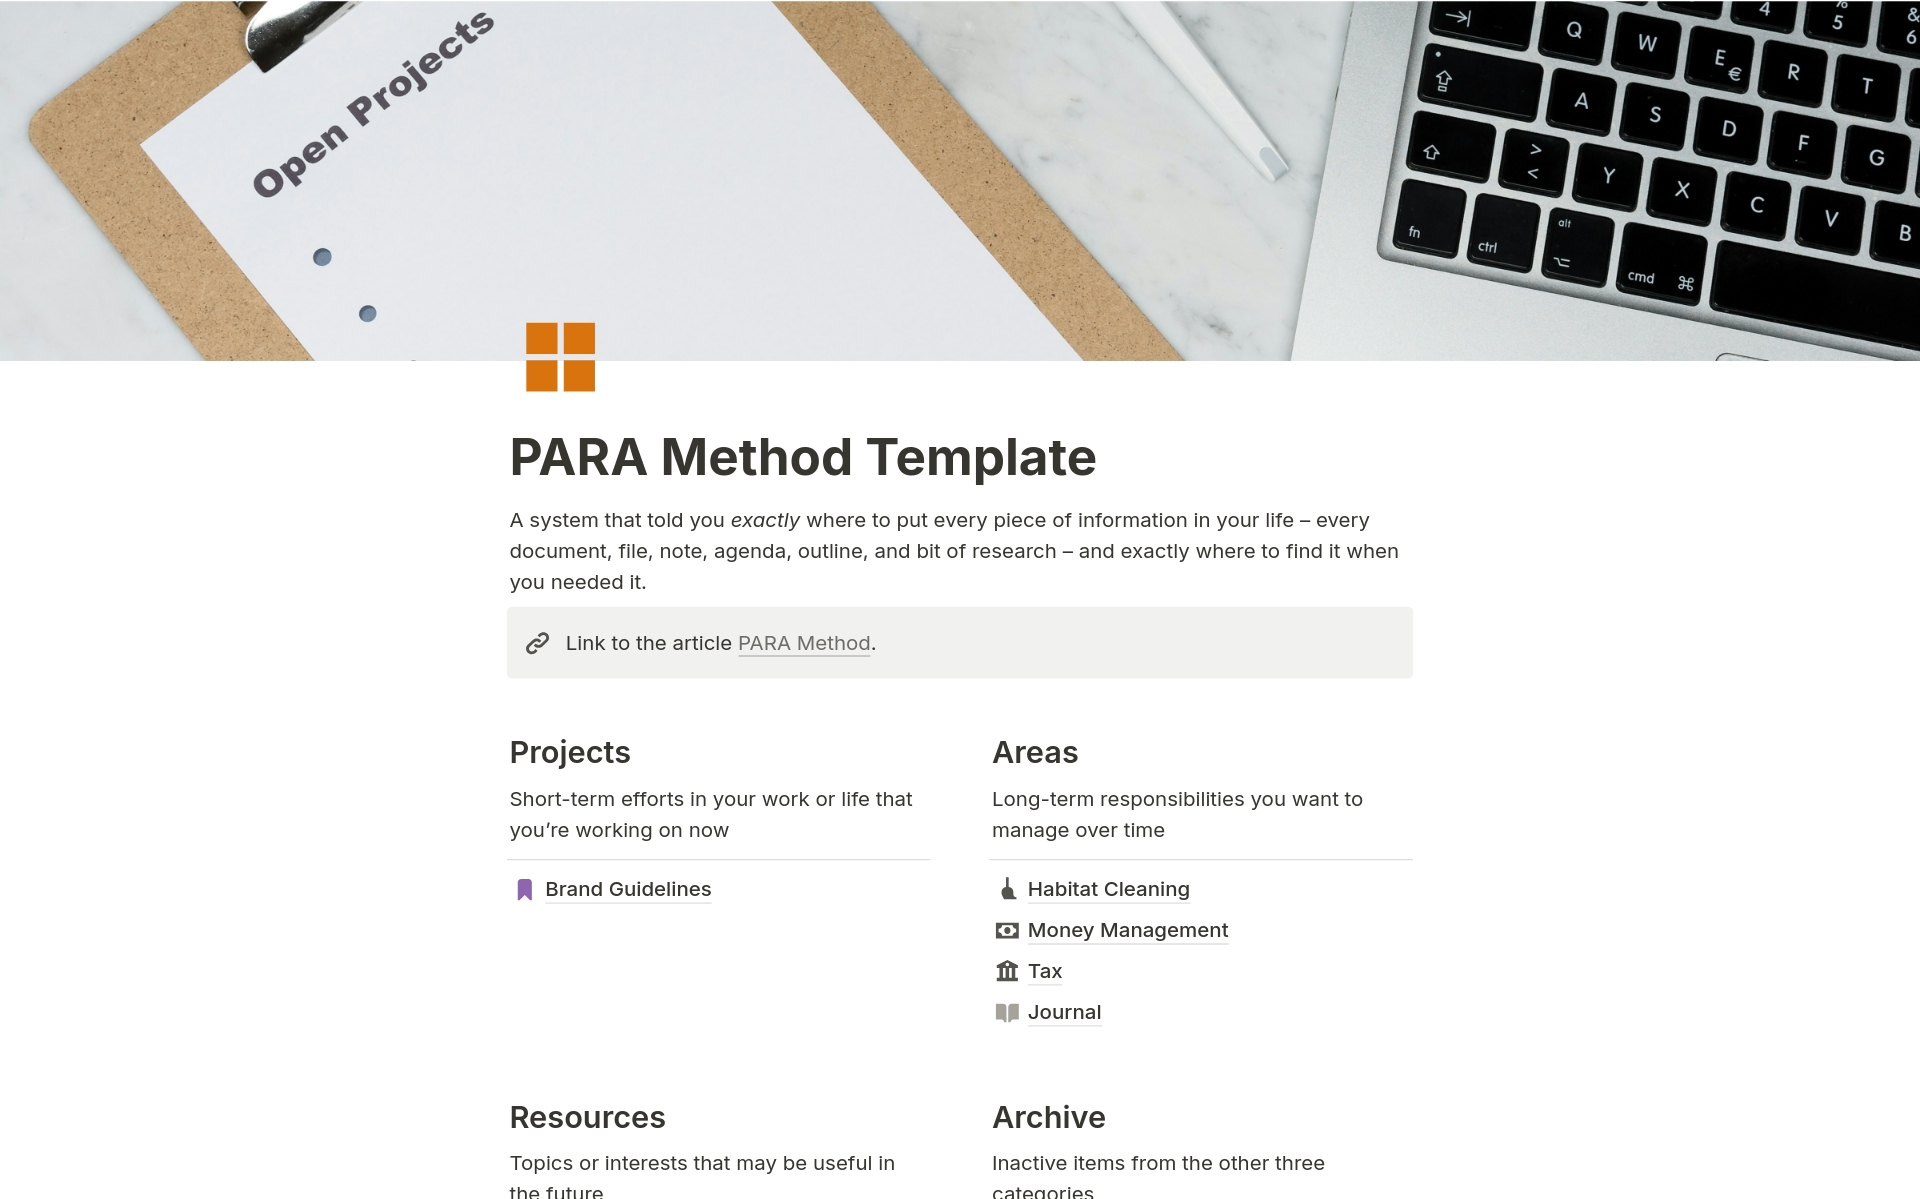 This is an unofficial Notion Template of the PARA method system. It guides you on where to place every piece of information from Project, Area, Resources, Archive.